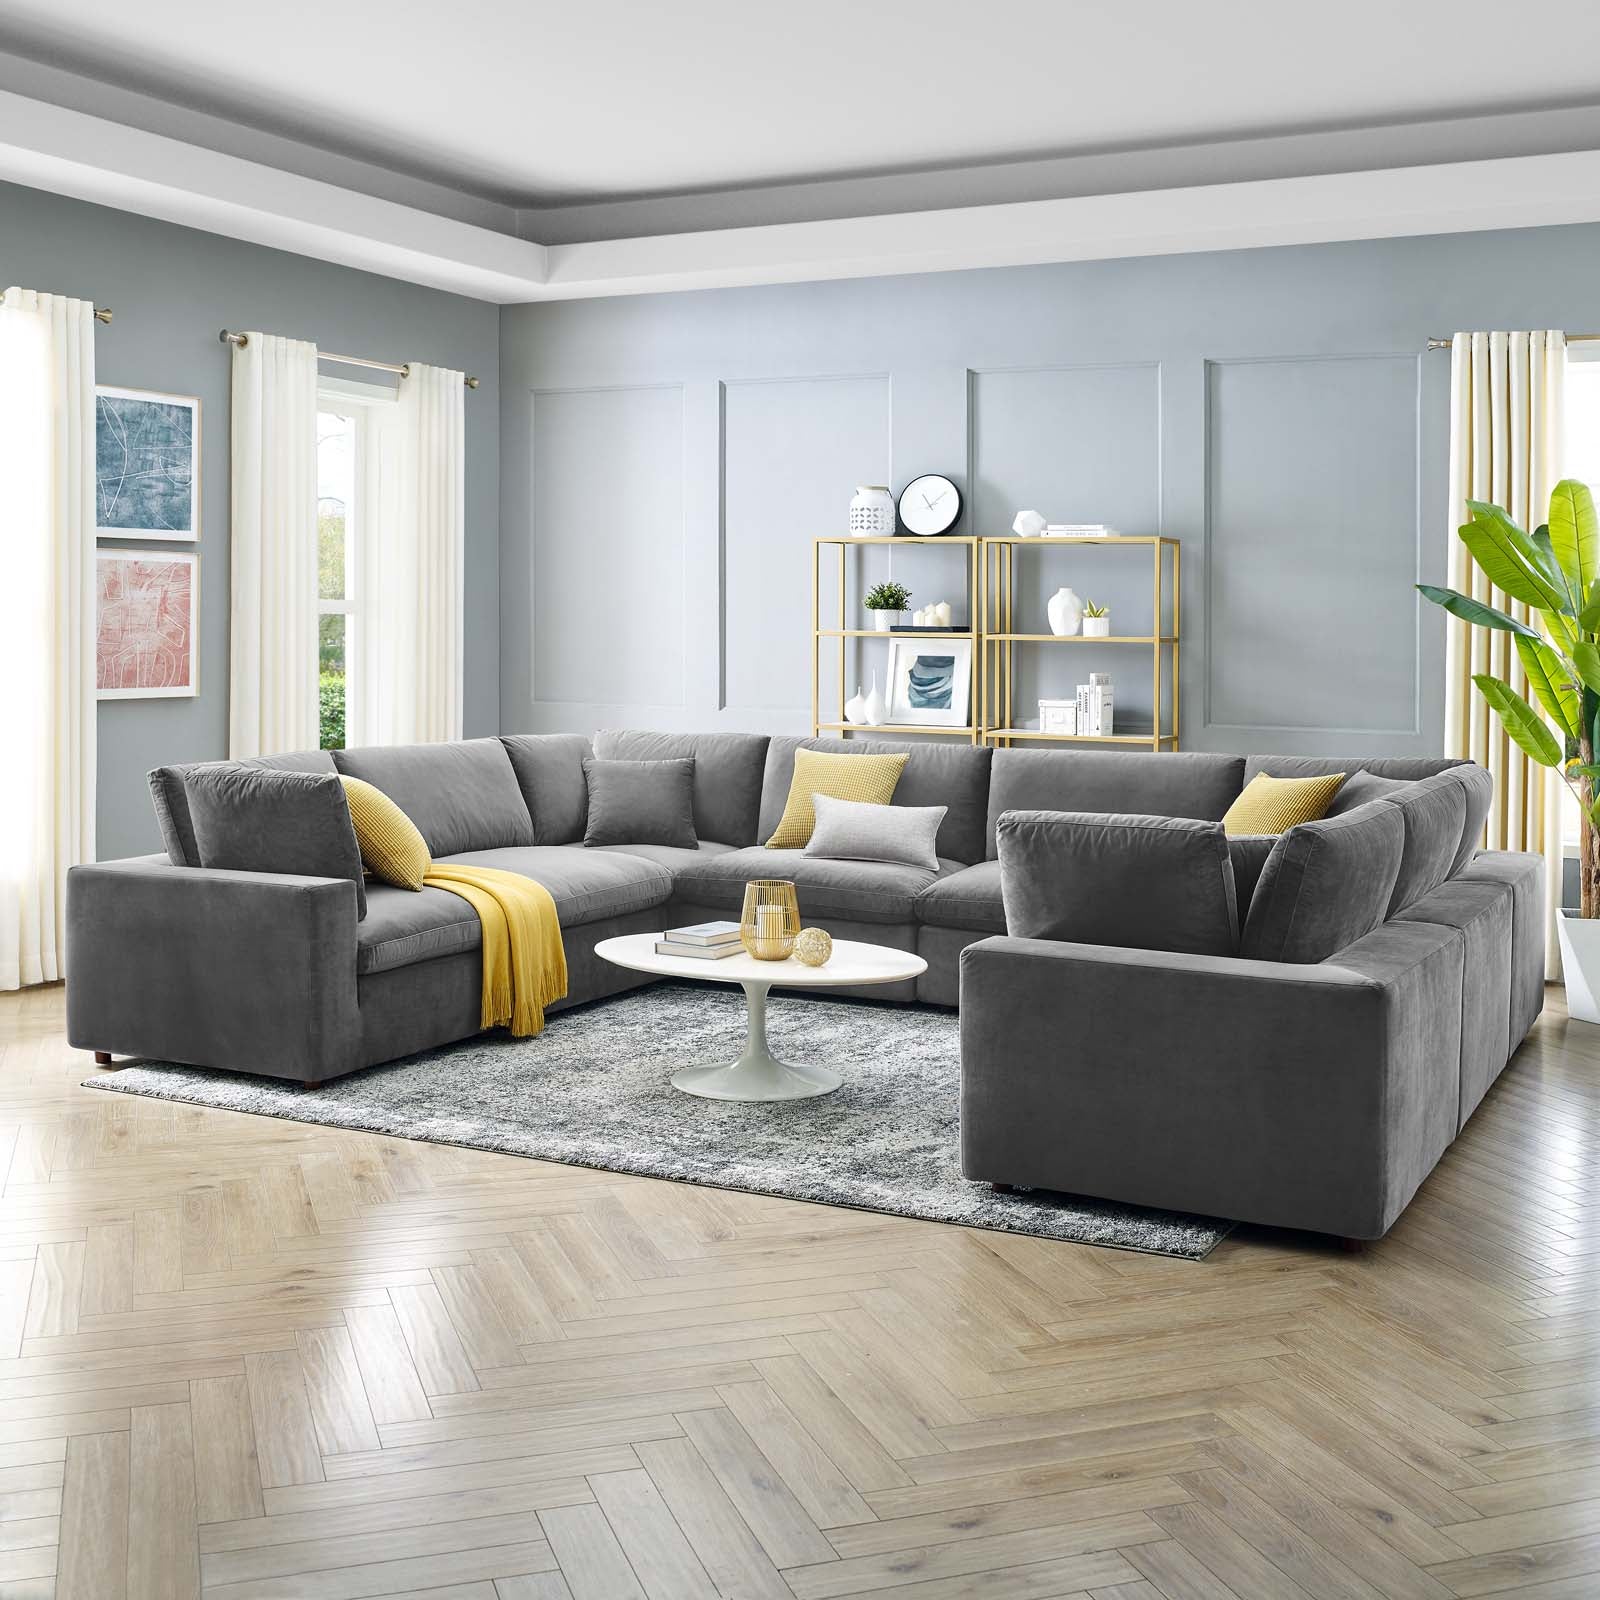 Modway Sectional Sofas - Commix Down Filled Overstuffed Performance Velvet 8-Piece Sectional Sofa Gray